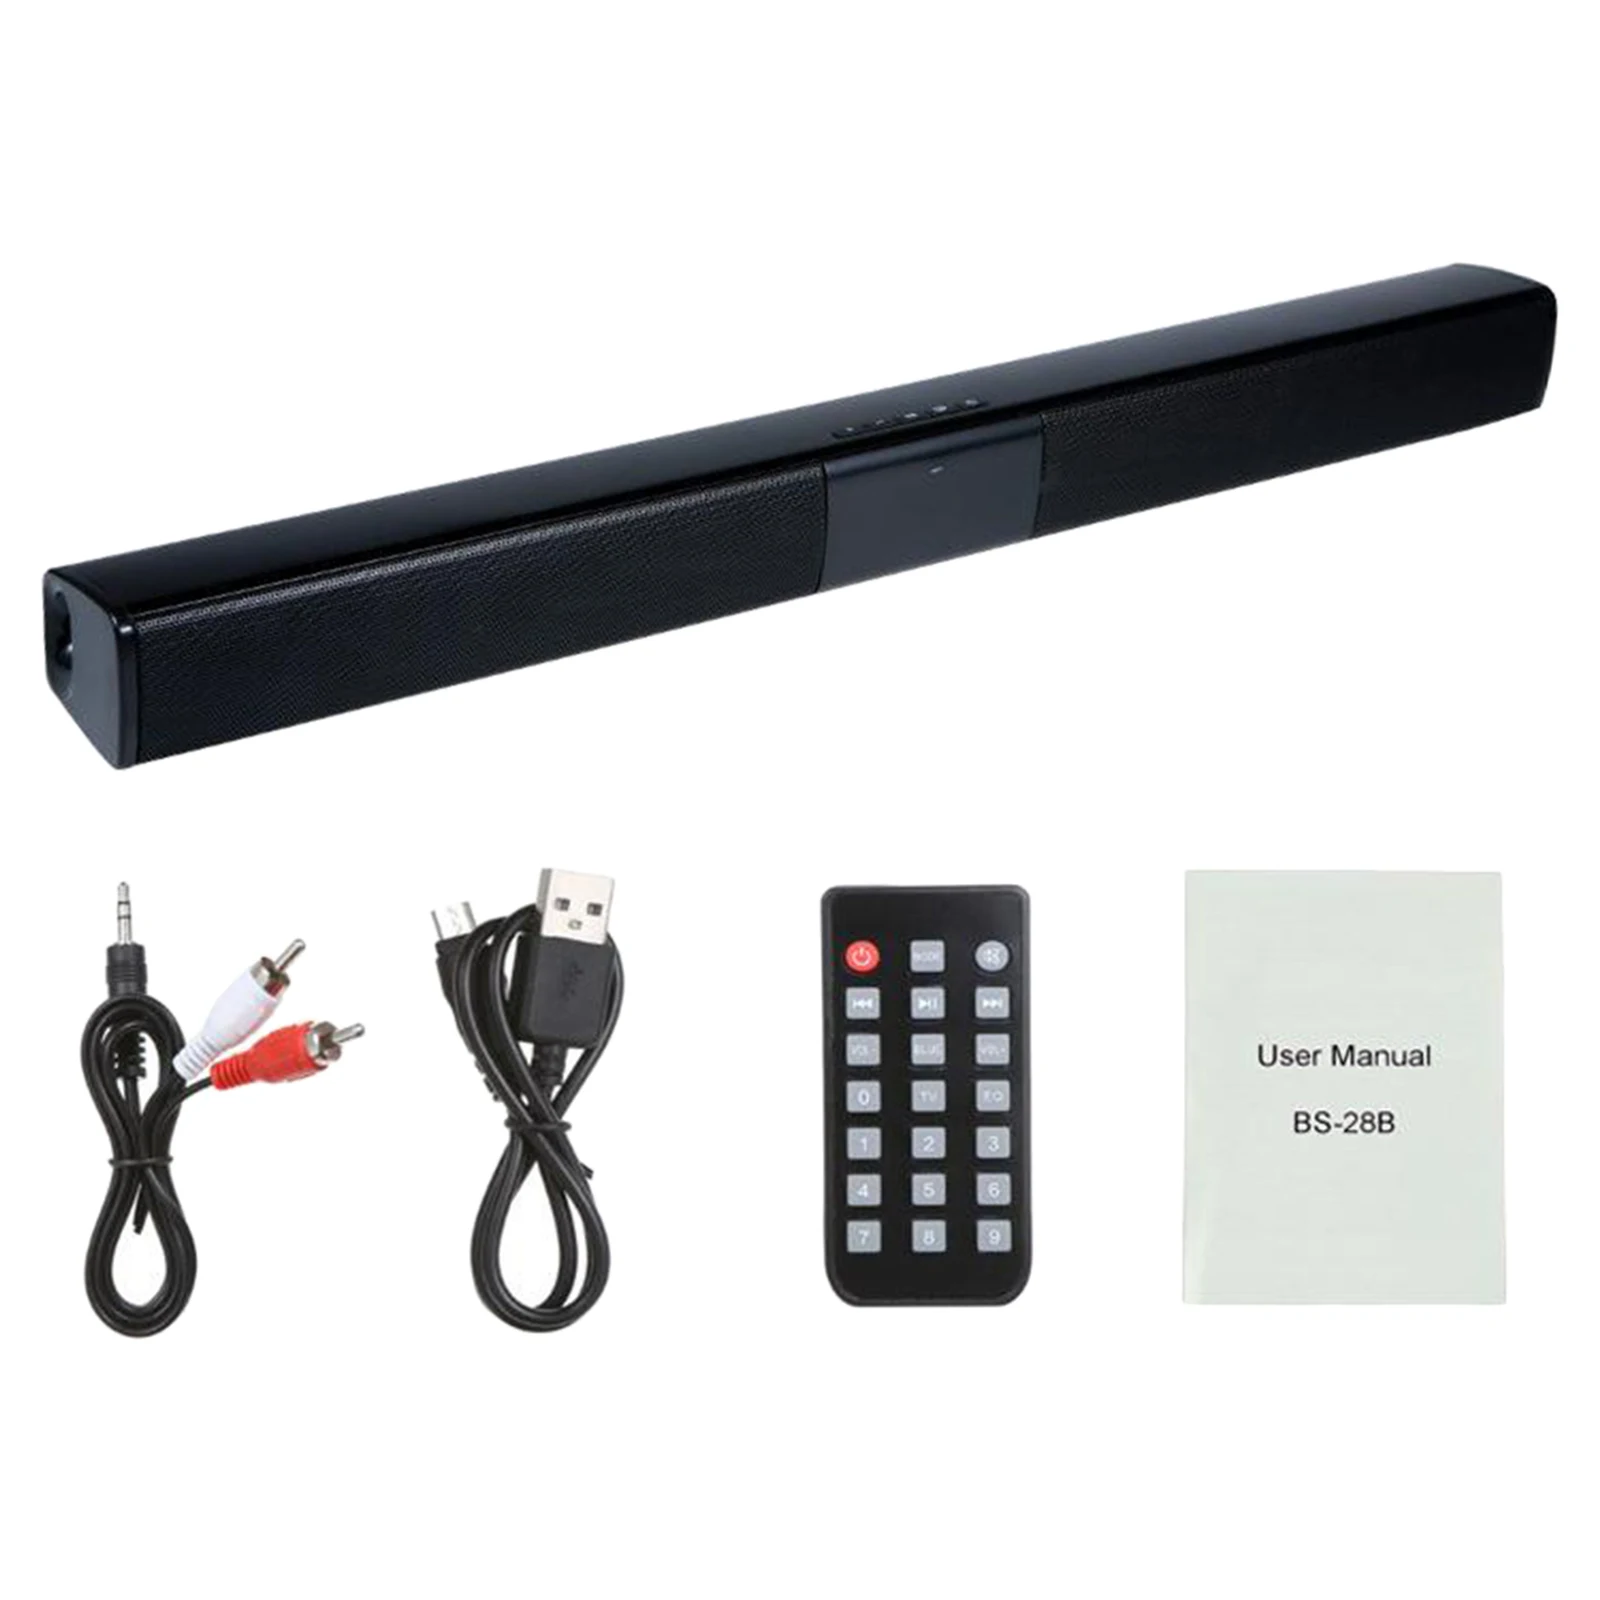 550mm Soundbar for TV Wired/Wireless Bluetooth Stereo Speaker with DSP technology, Multi-input